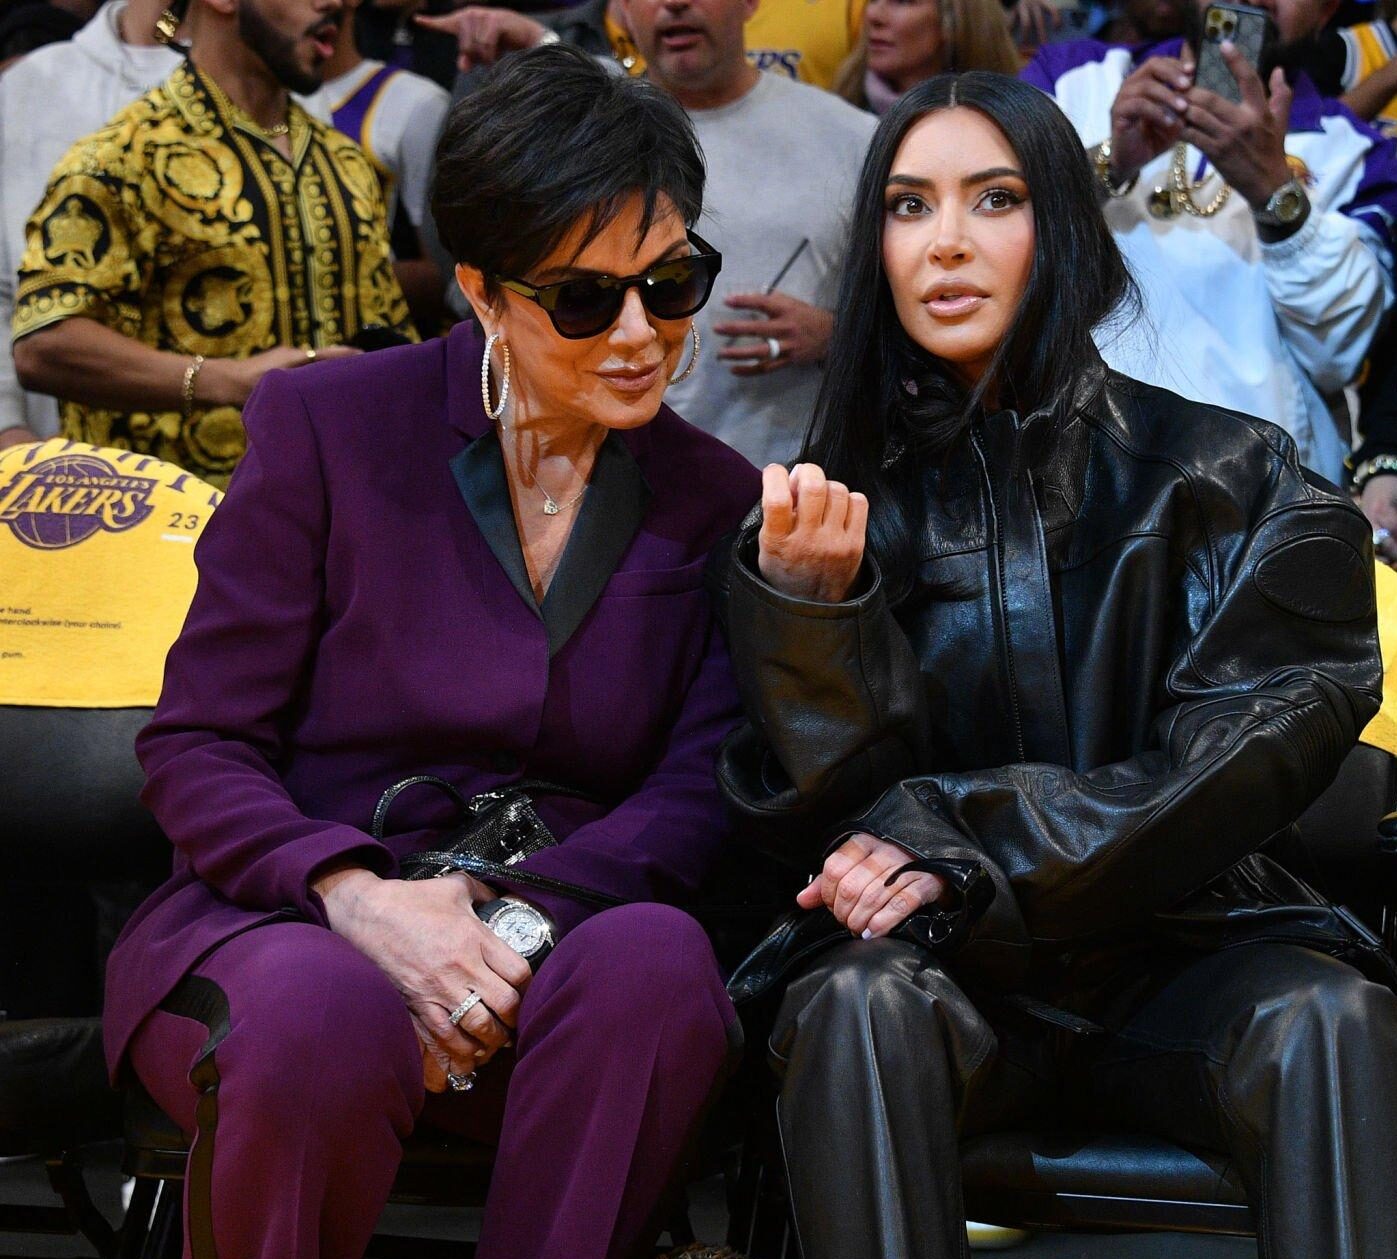 Kris Jenner Wears Exclusive $115,000 Diamond-Encrusted Rolex to Lakers Game